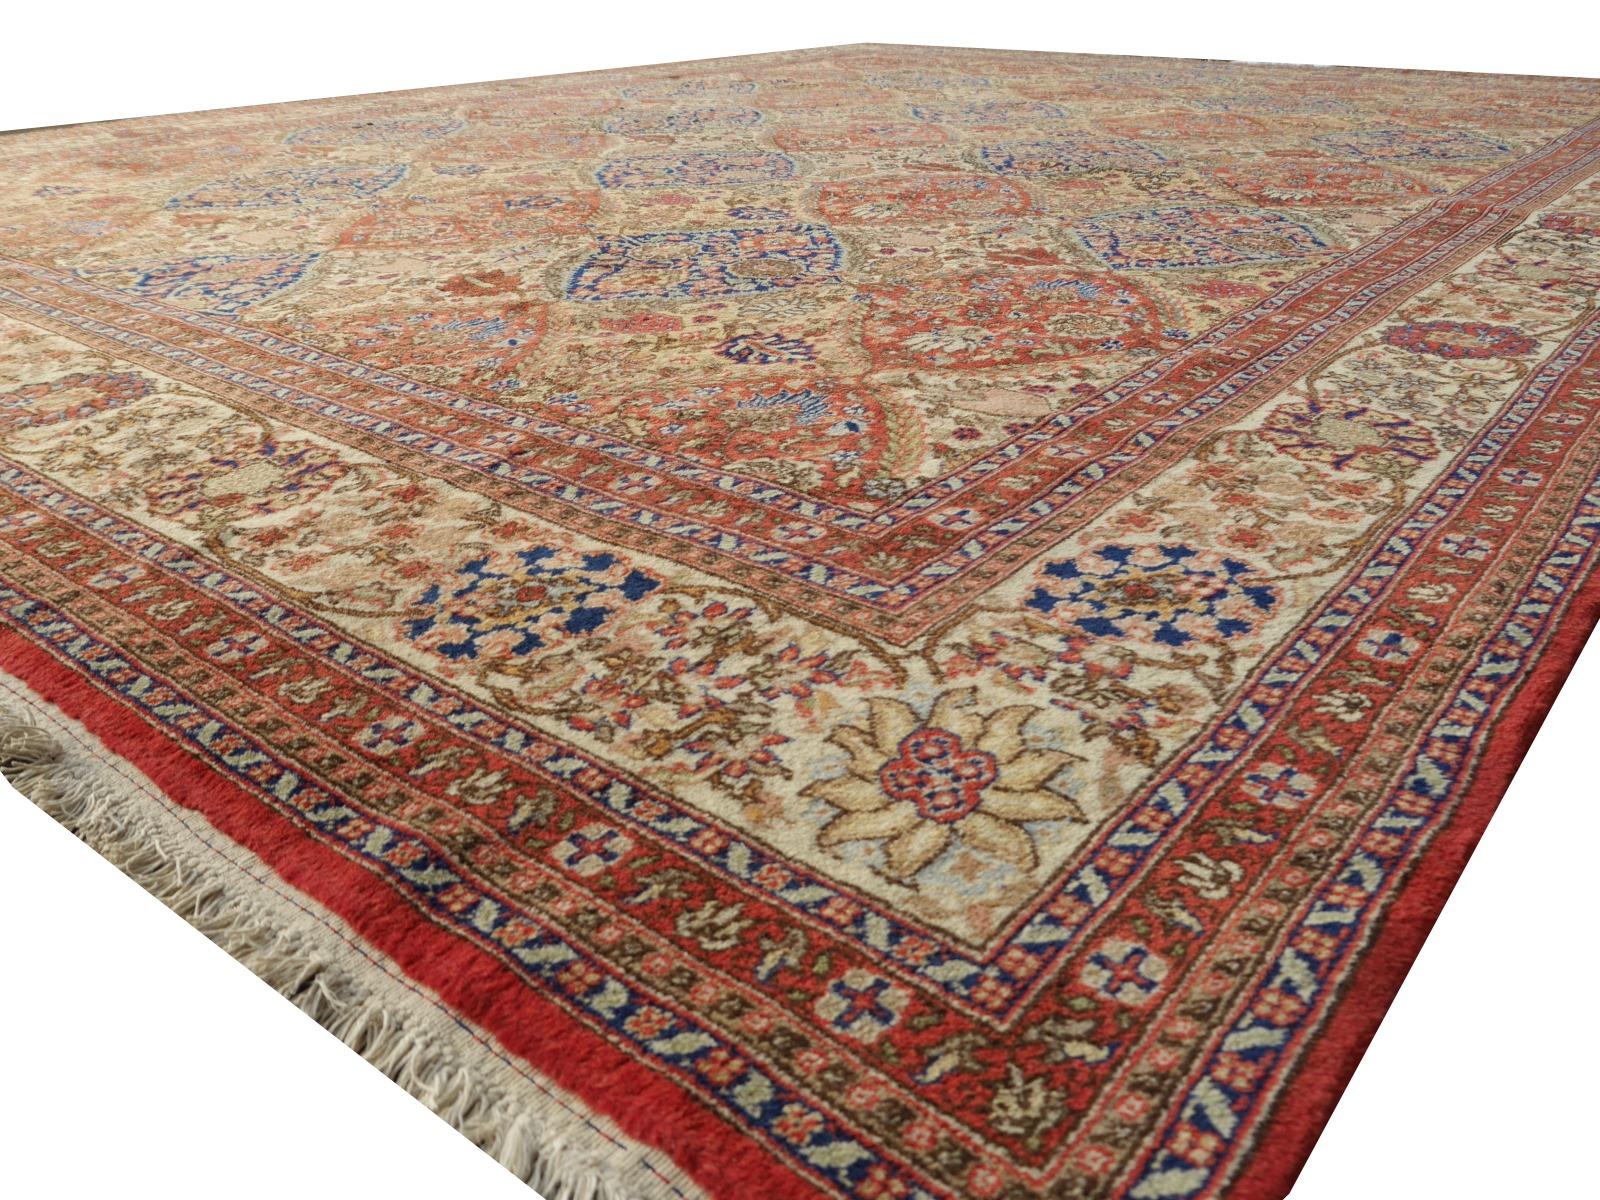 Large sized 10 x 13 ft Renaissance Aubusson Savonnerie style European hand knotted Area rug

This large hand knotted wool rug shows a Persian Kirman / Kerman design from the Midcentury style. it has a wool pile and cotton warp and weft. It is